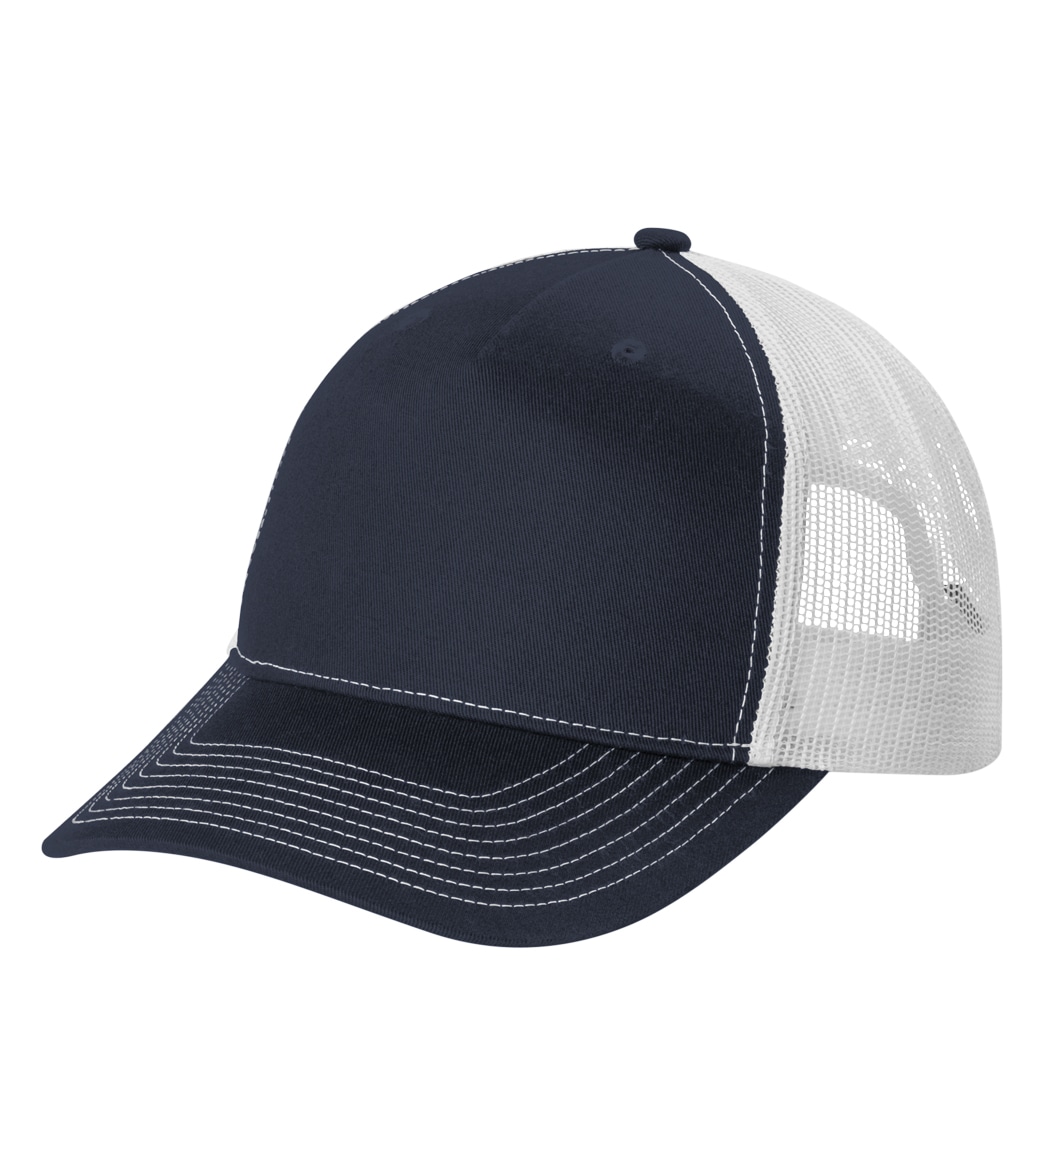 Snapback Trucker Hat - Rich Navy/White One Size Cotton/Polyester - Swimoutlet.com